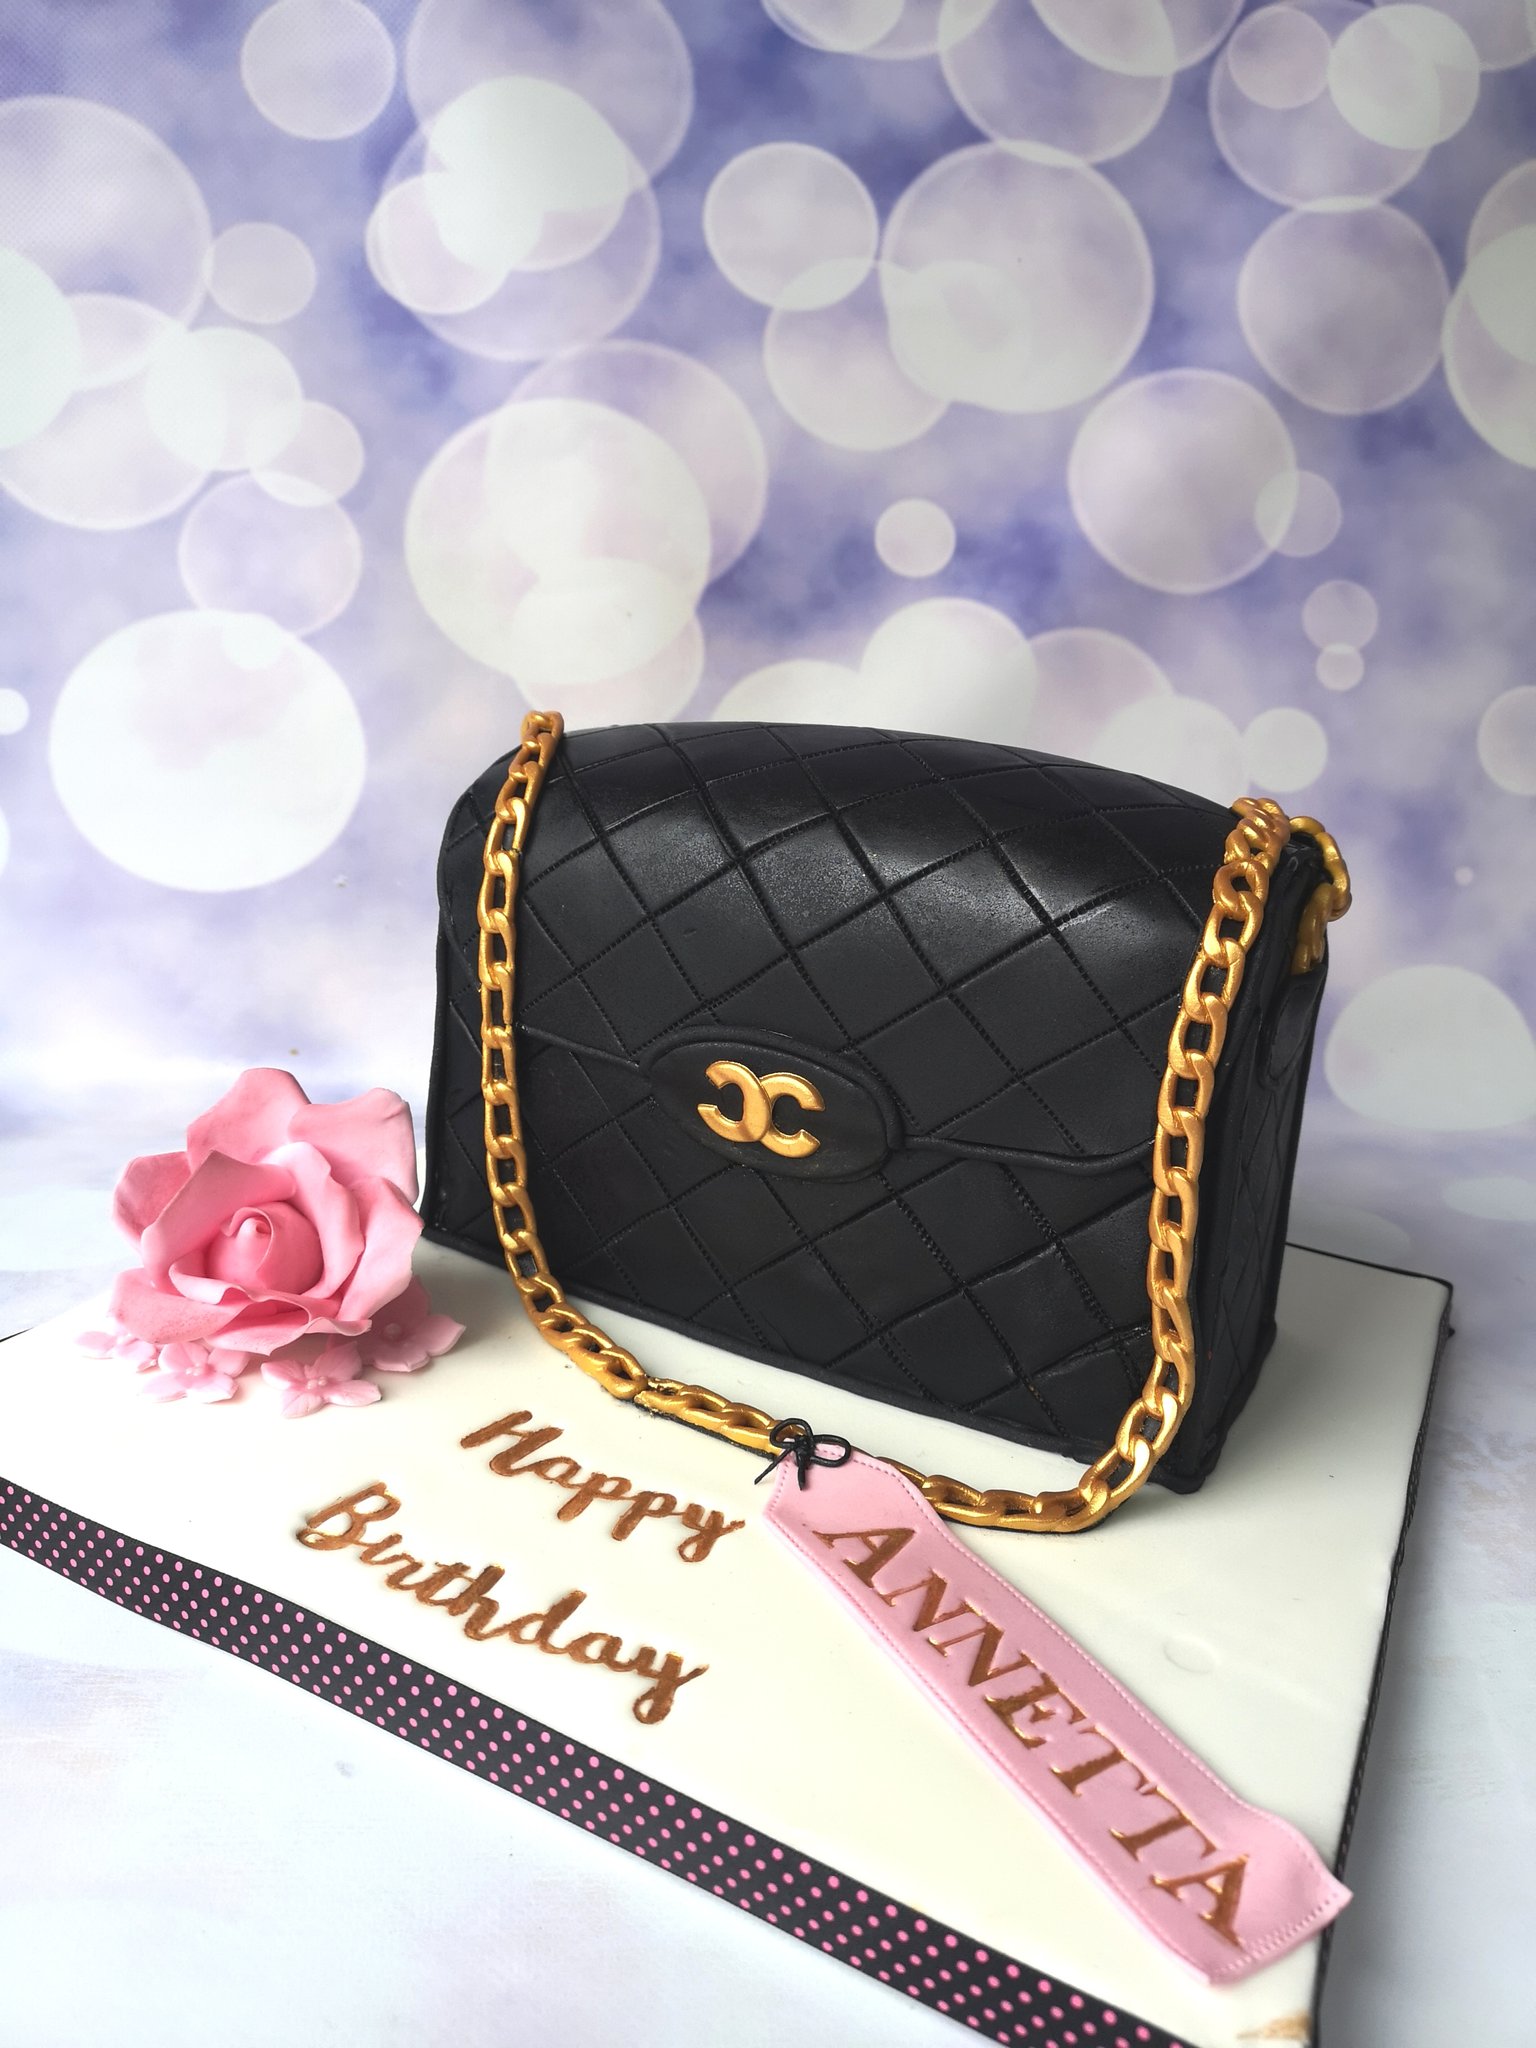 Chanel Bag Cake - Celestial Desserts and Bakery